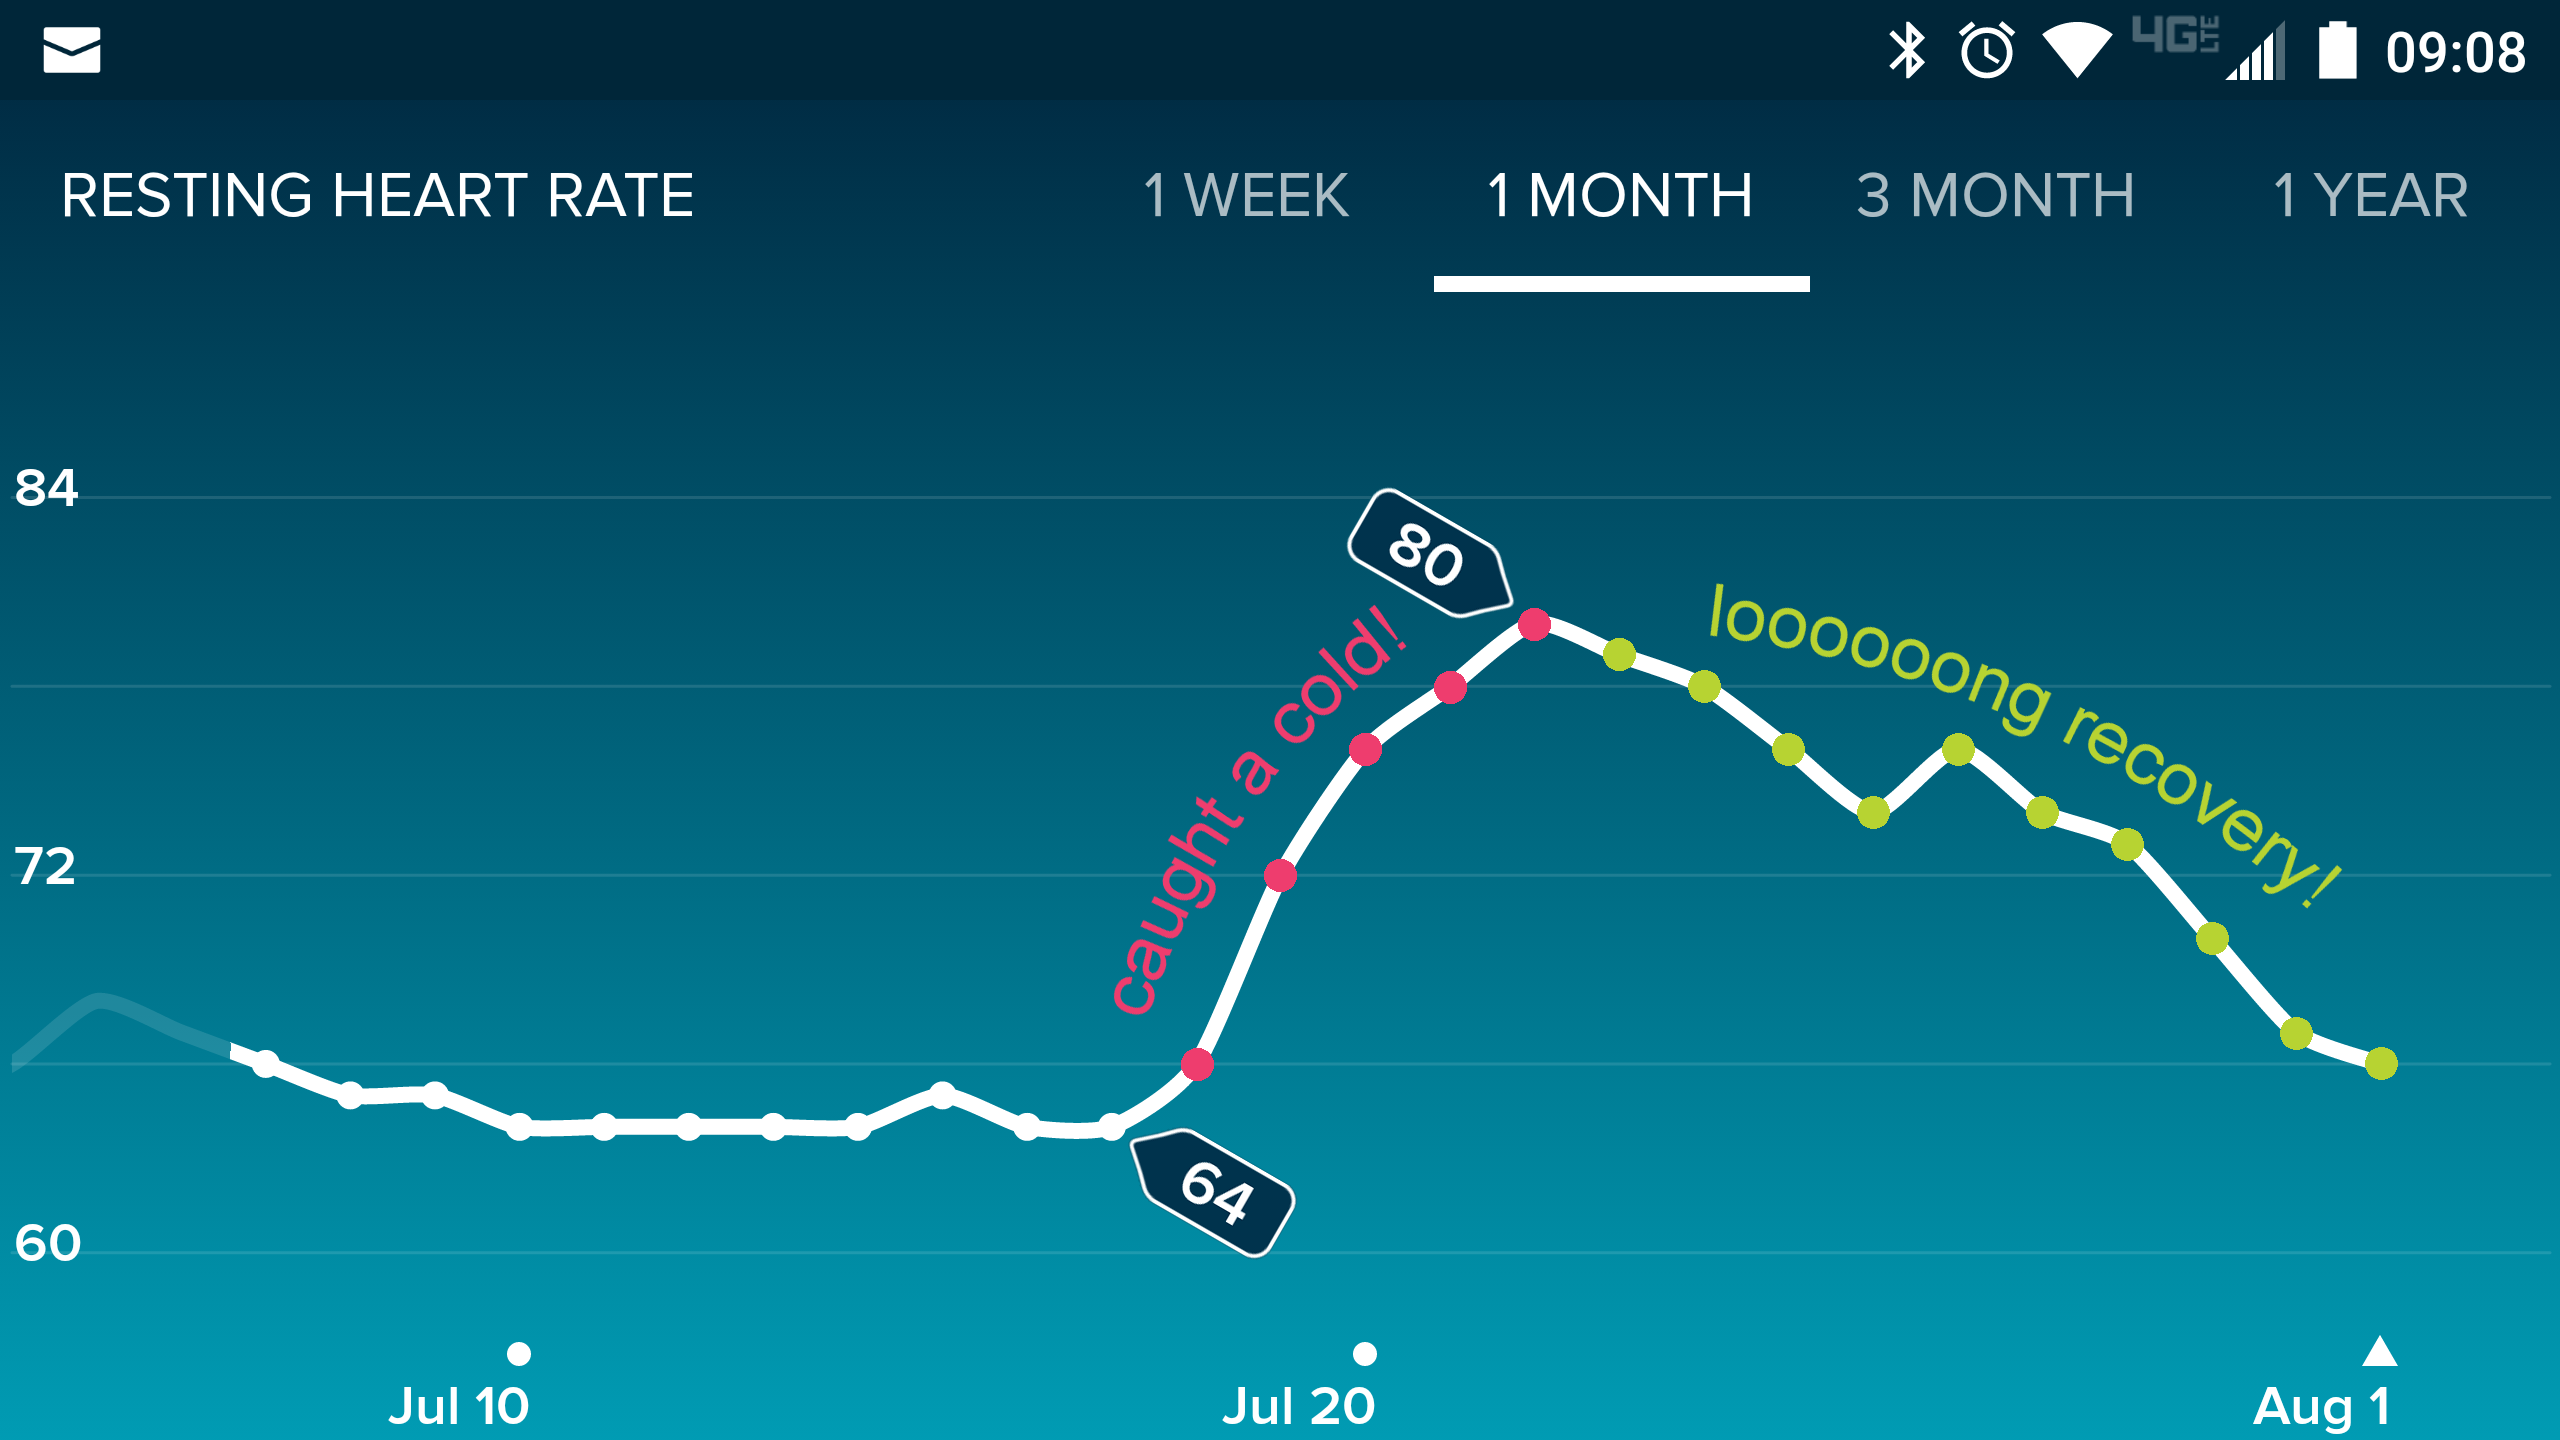 One digital health metric I now track almost religiously